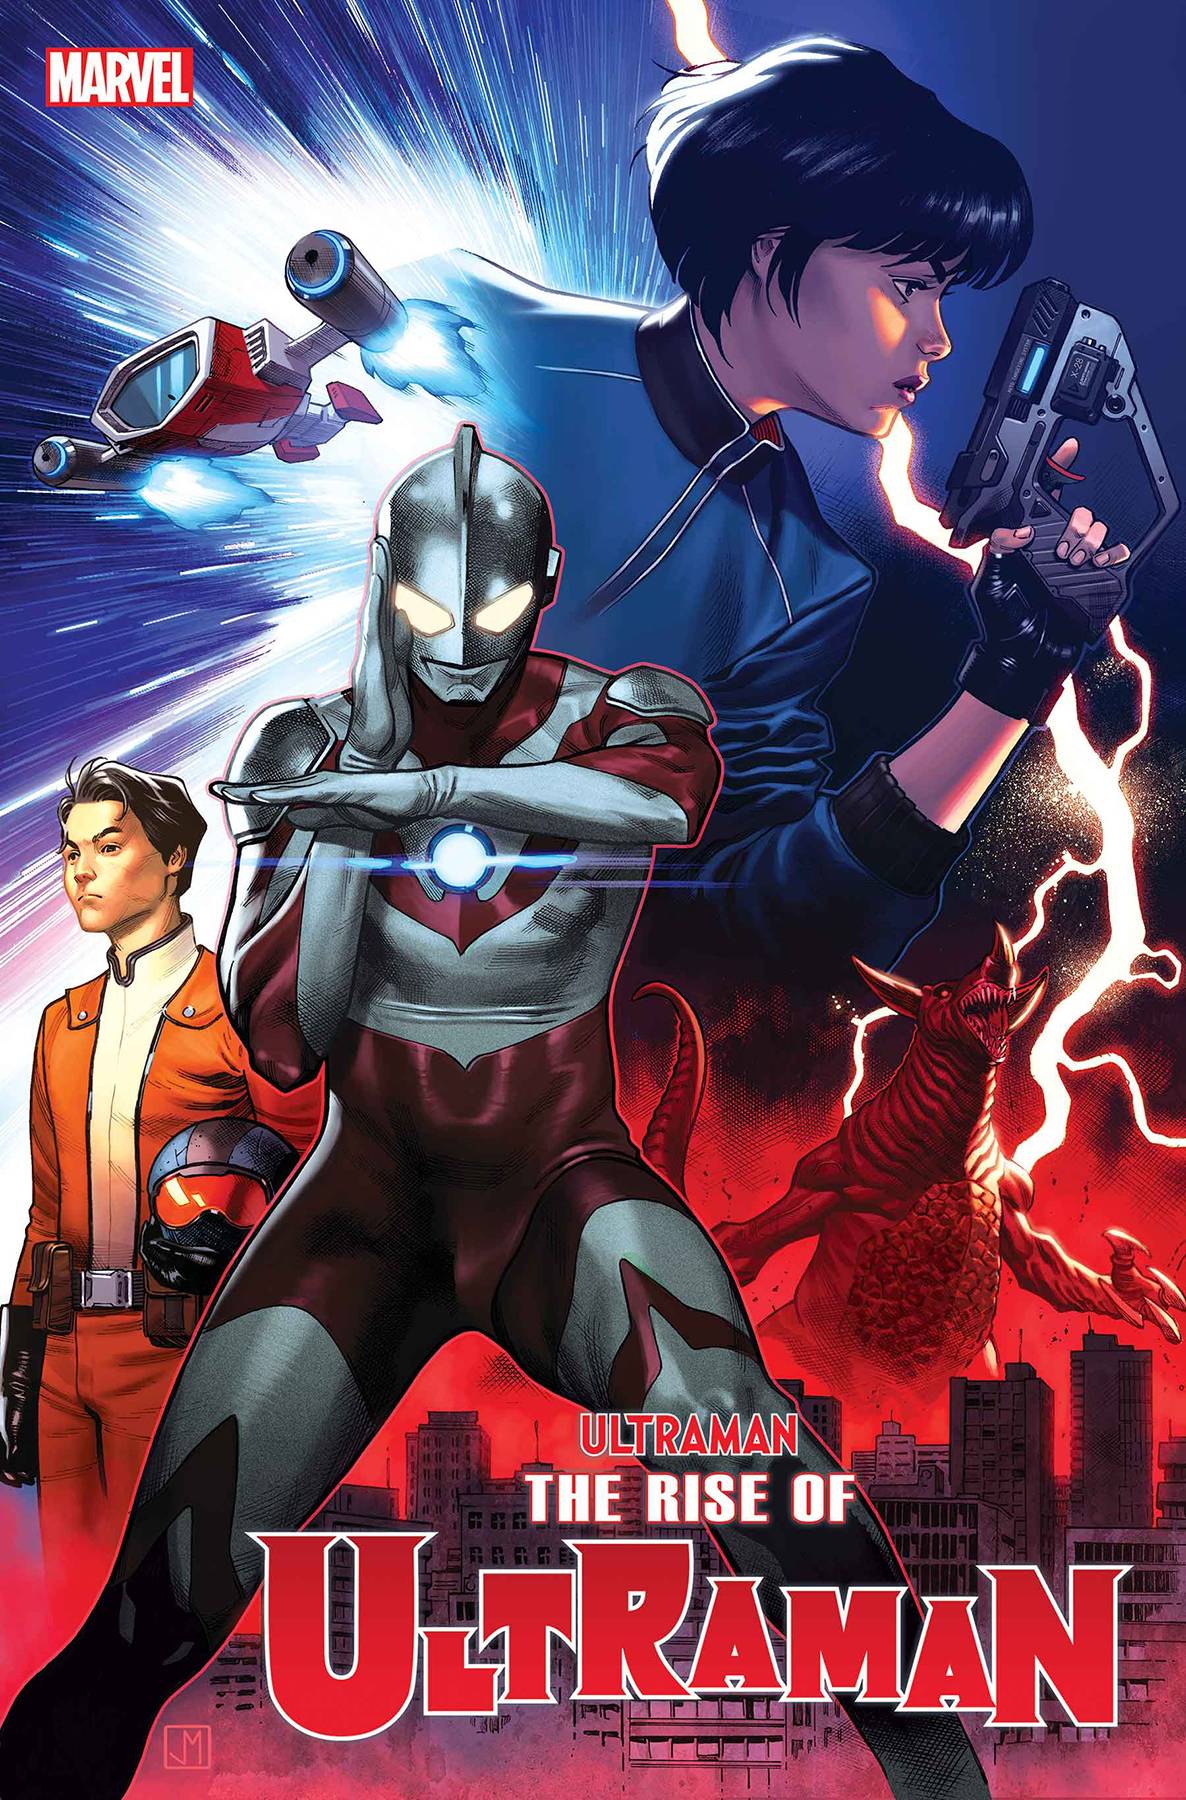 RISE OF ULTRAMAN #2 (OF 5) | Game Master's Emporium (The New GME)